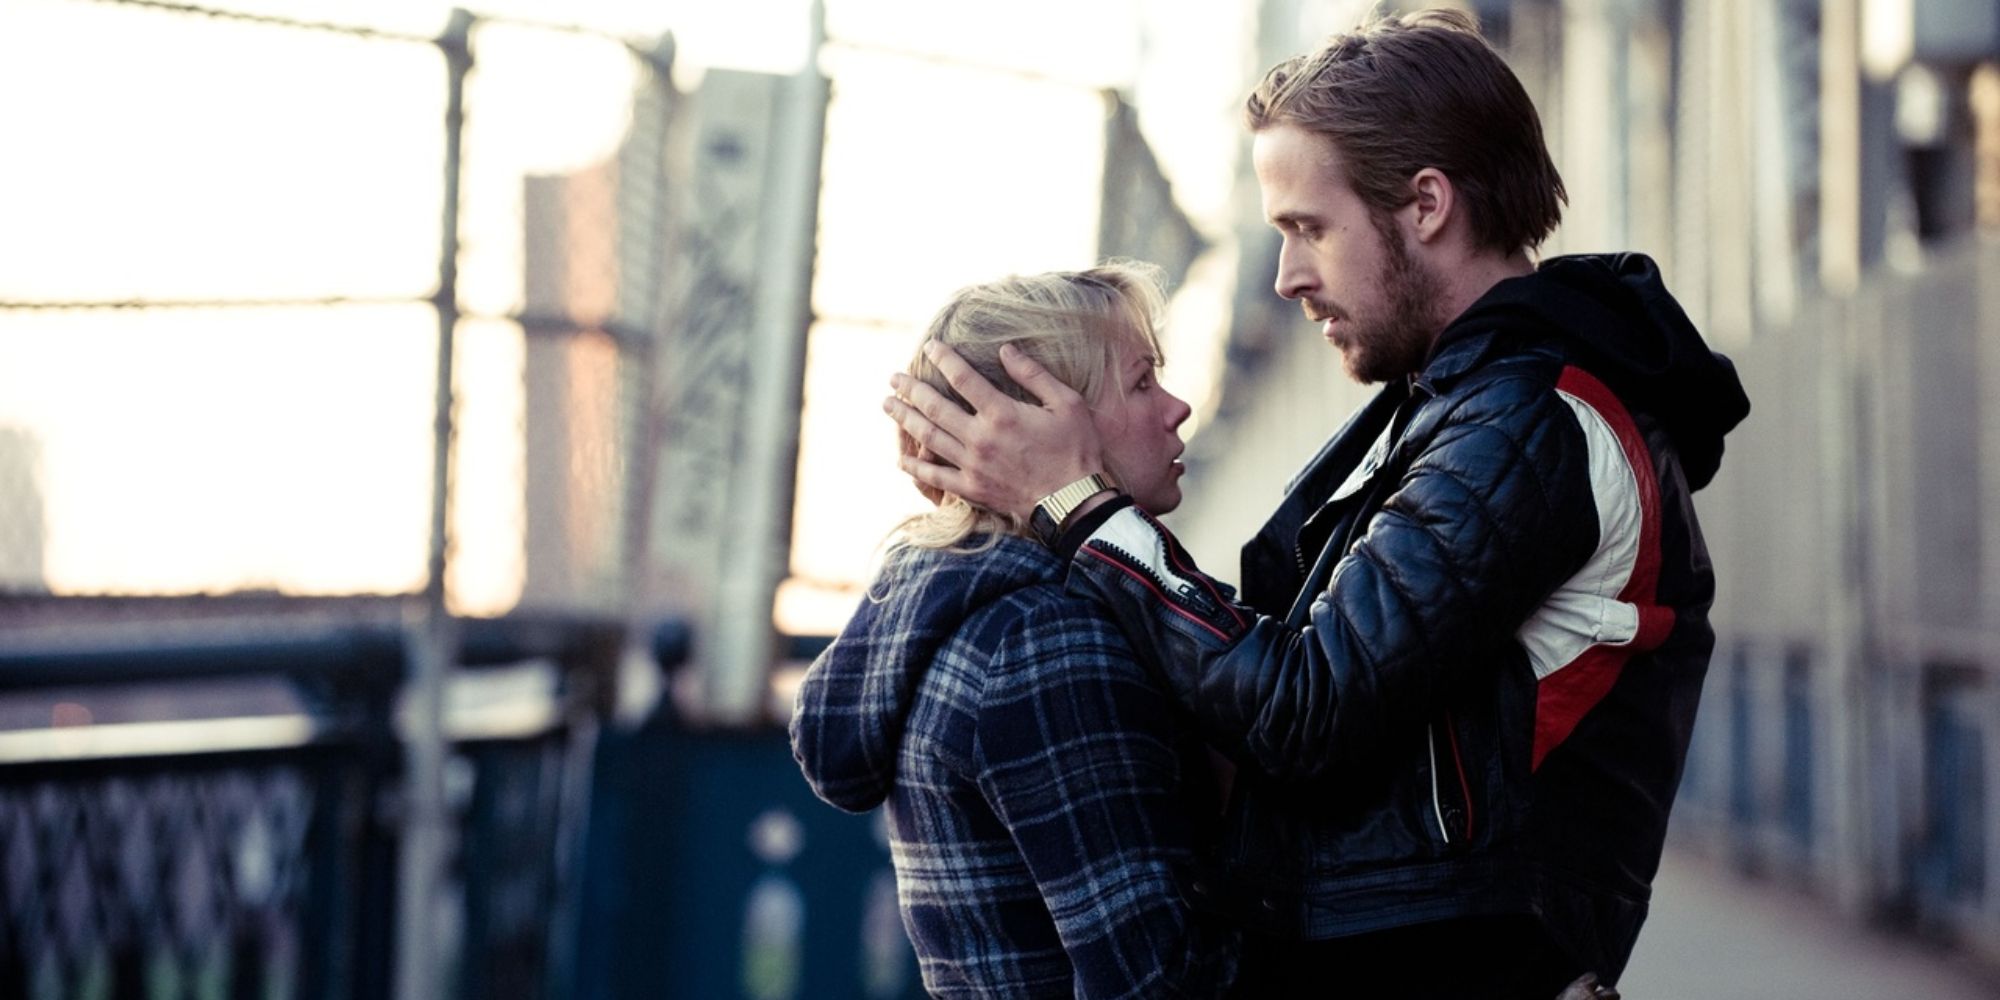 Ryan Gosling holding Michelle Williams' face in his hands in 'Blue Valentine'